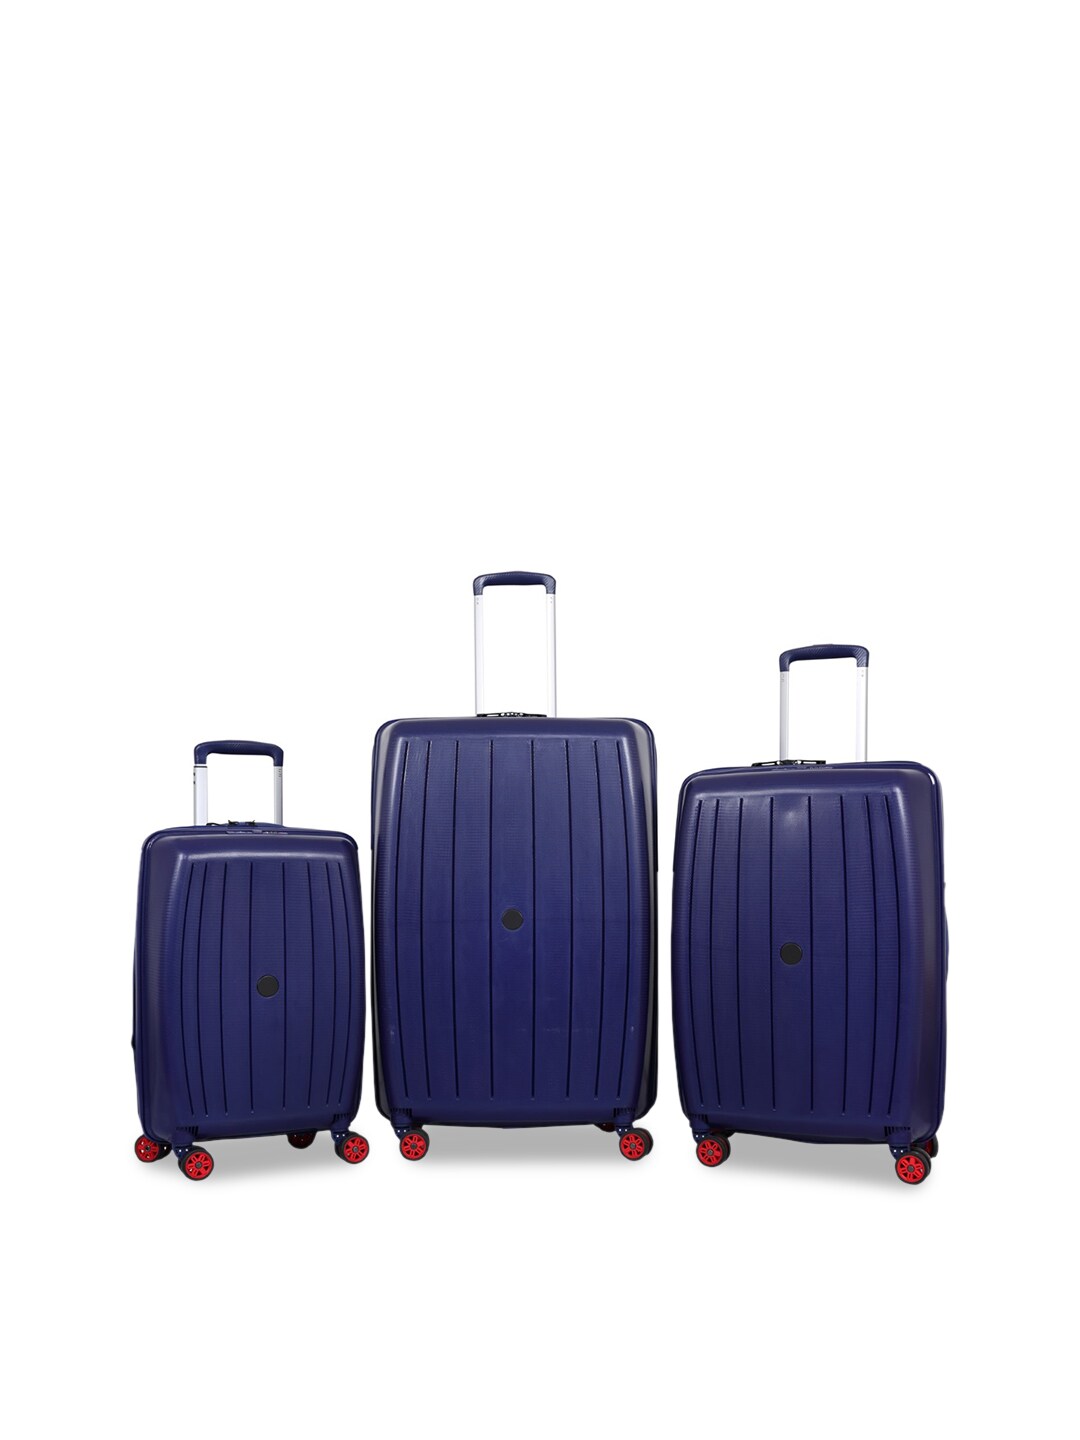 Polo Class Set Of 3 Blue Hard-Sided Trolley Suitcases Price in India